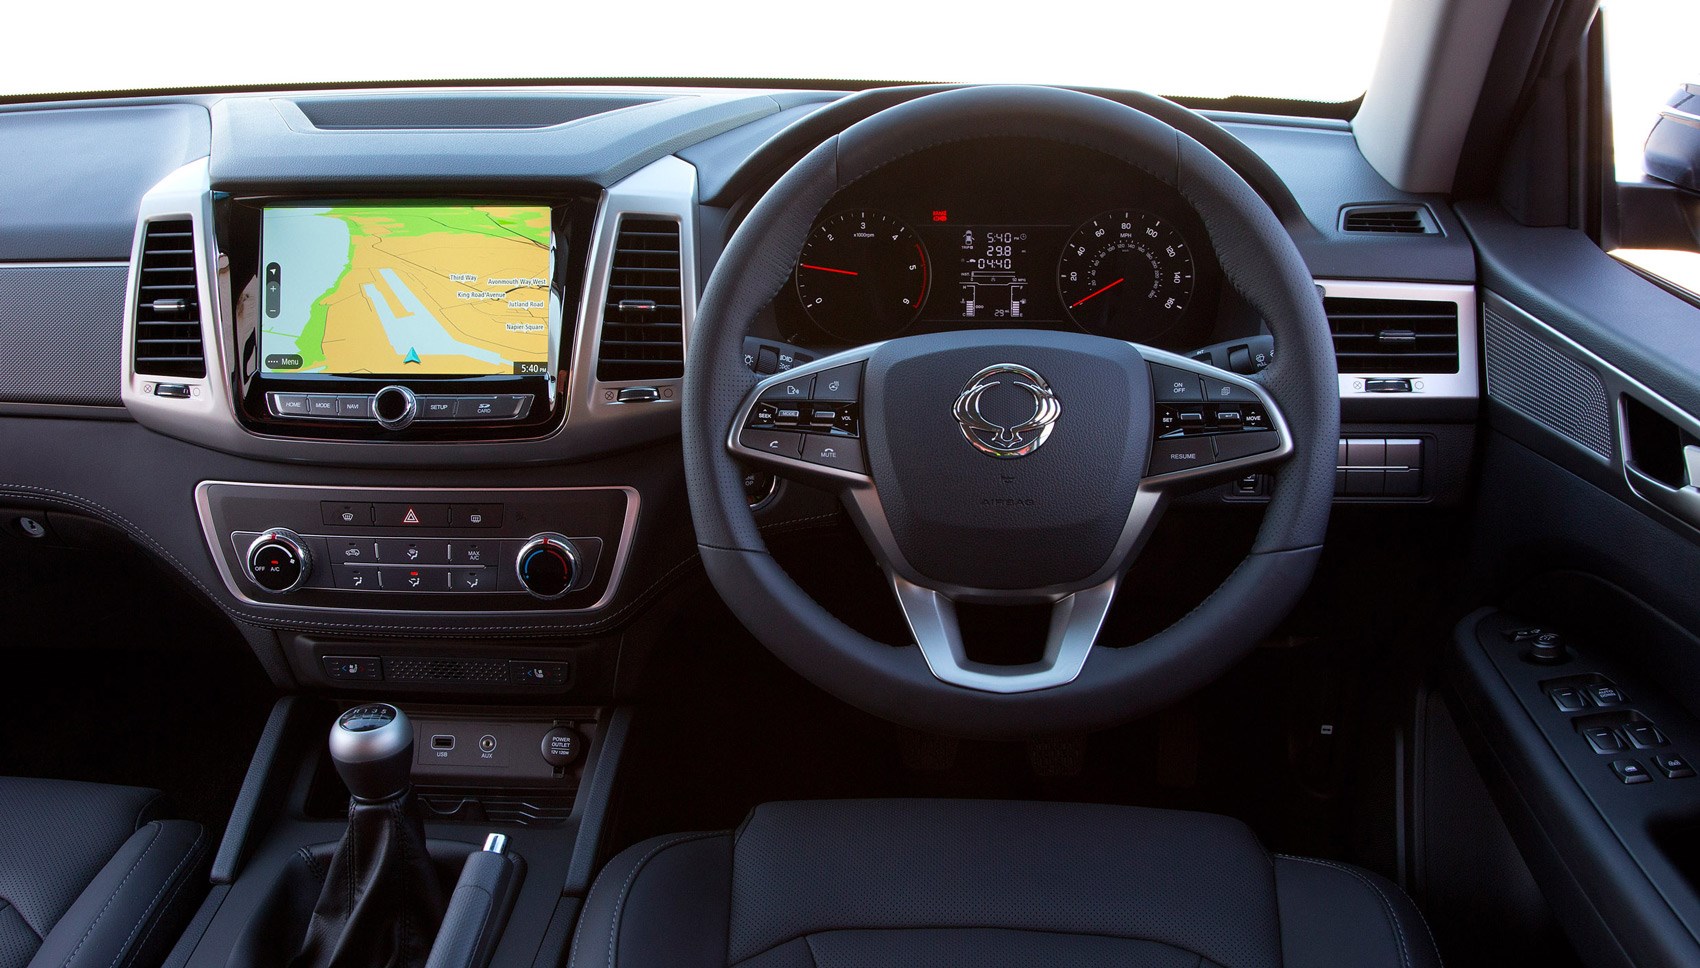 SsangYong Musso interior